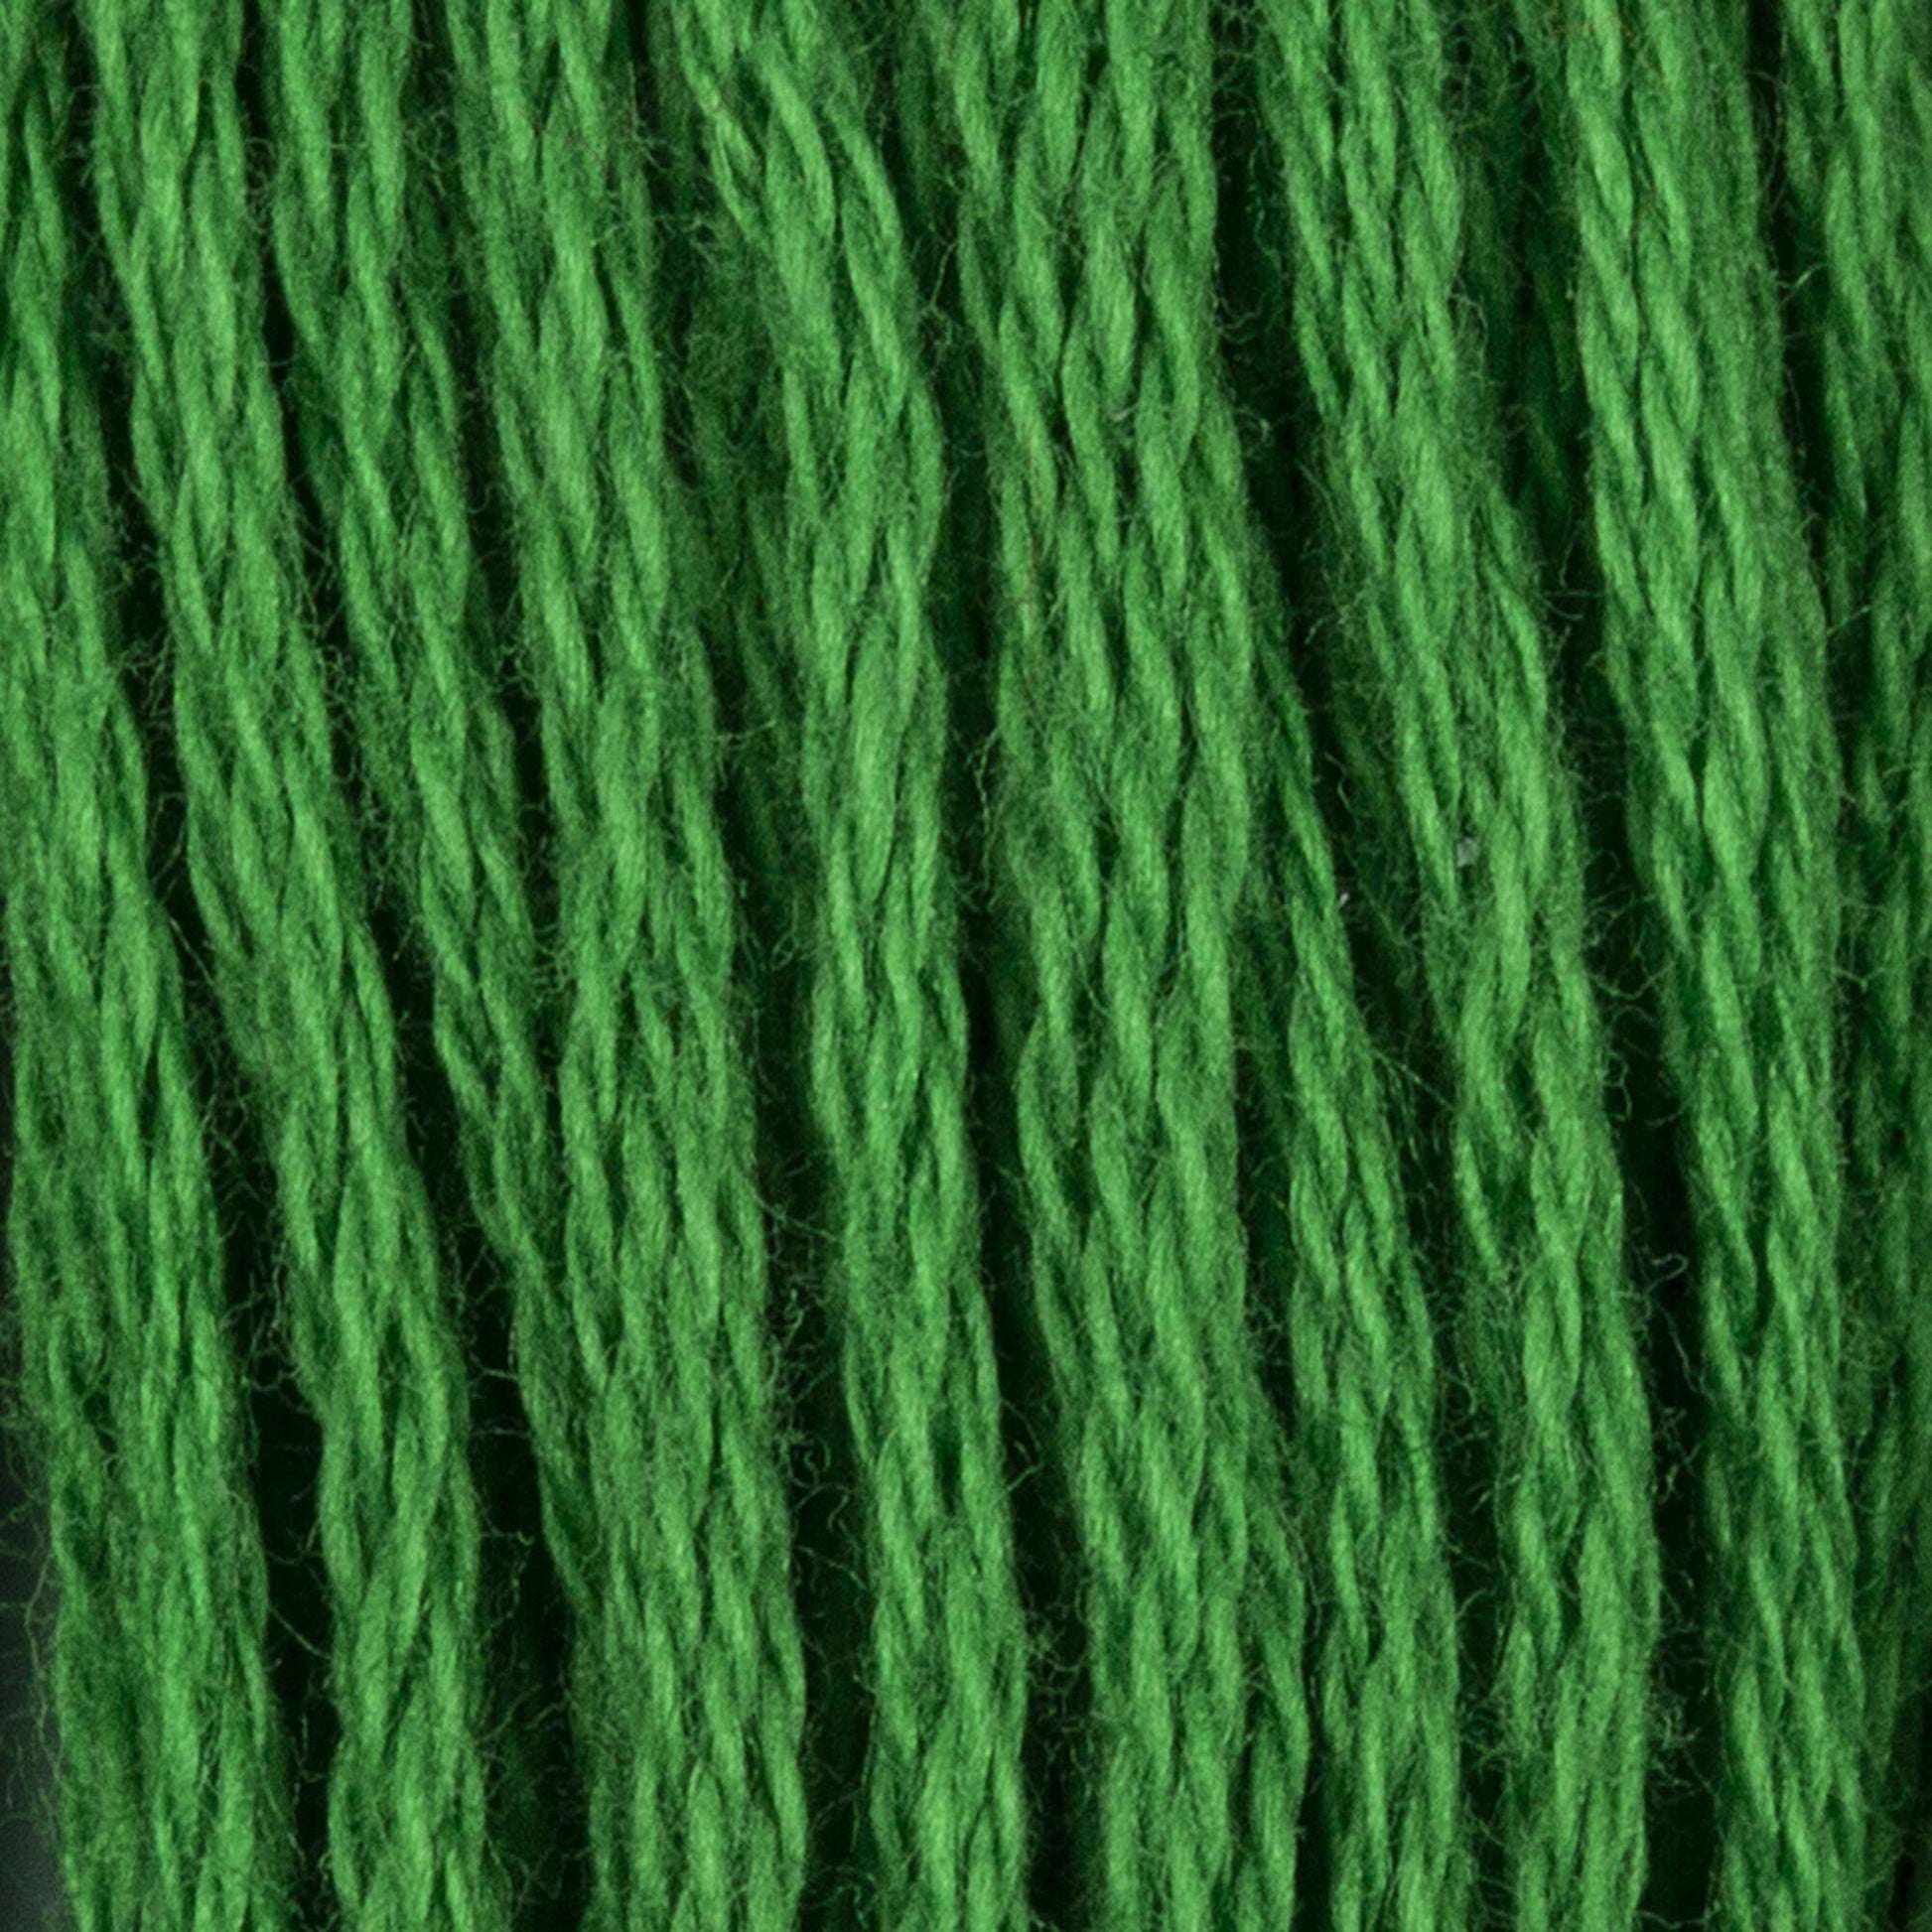 Coats & Clark Cotton Embroidery Floss Willow Green